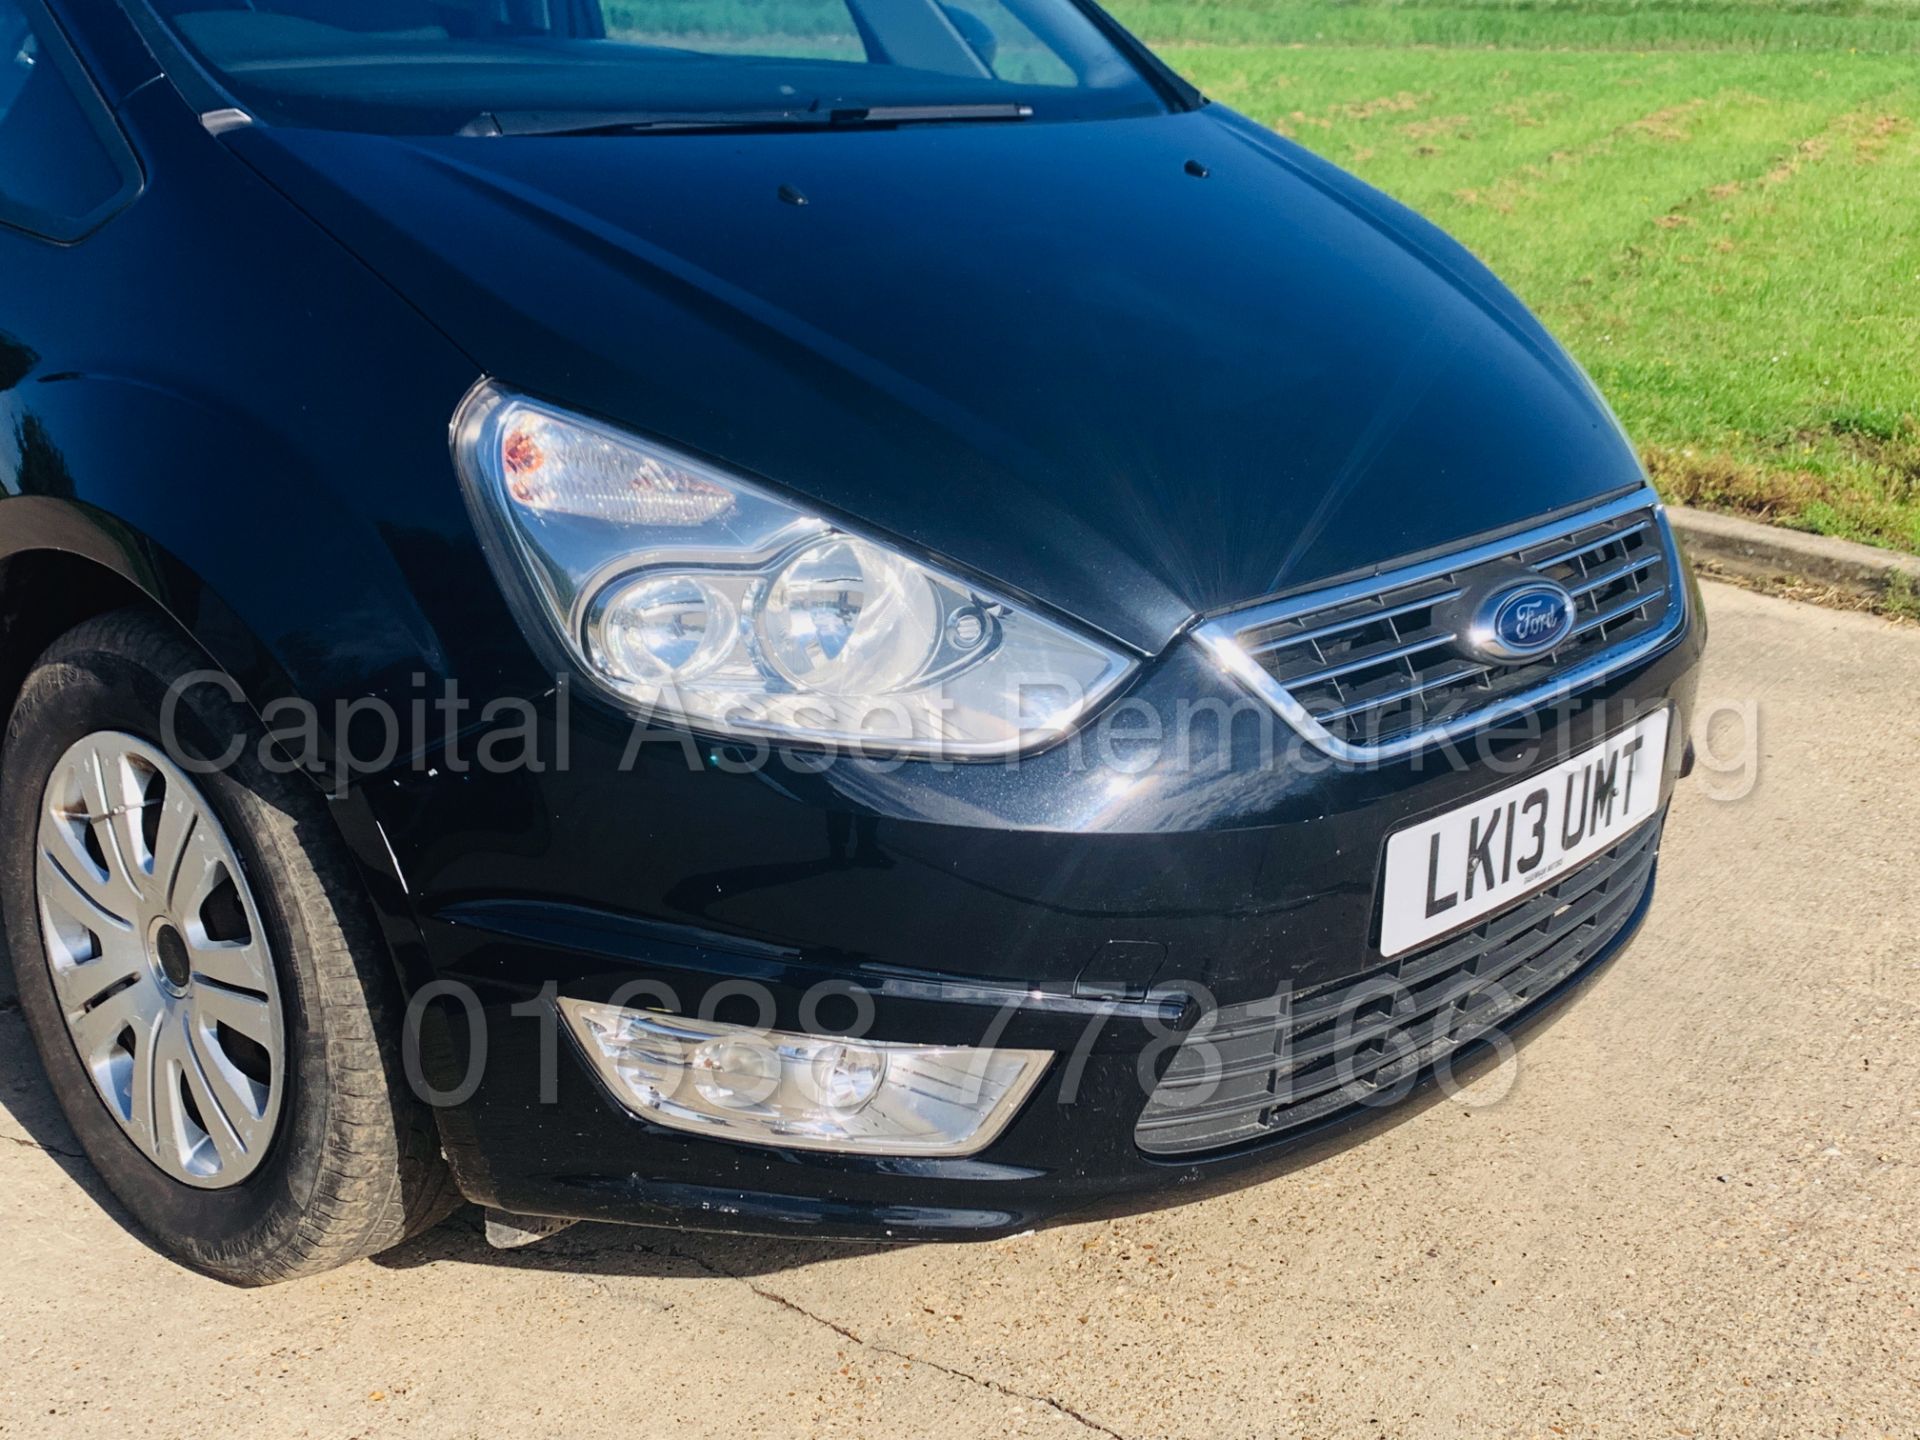 (ON SALE) FORD GALAXY *ZETEC* 7 SEATER MPV (2013) '2.0 TDCI - POWER SHIFT' (NO VAT - SAVE 20%) - Image 10 of 31